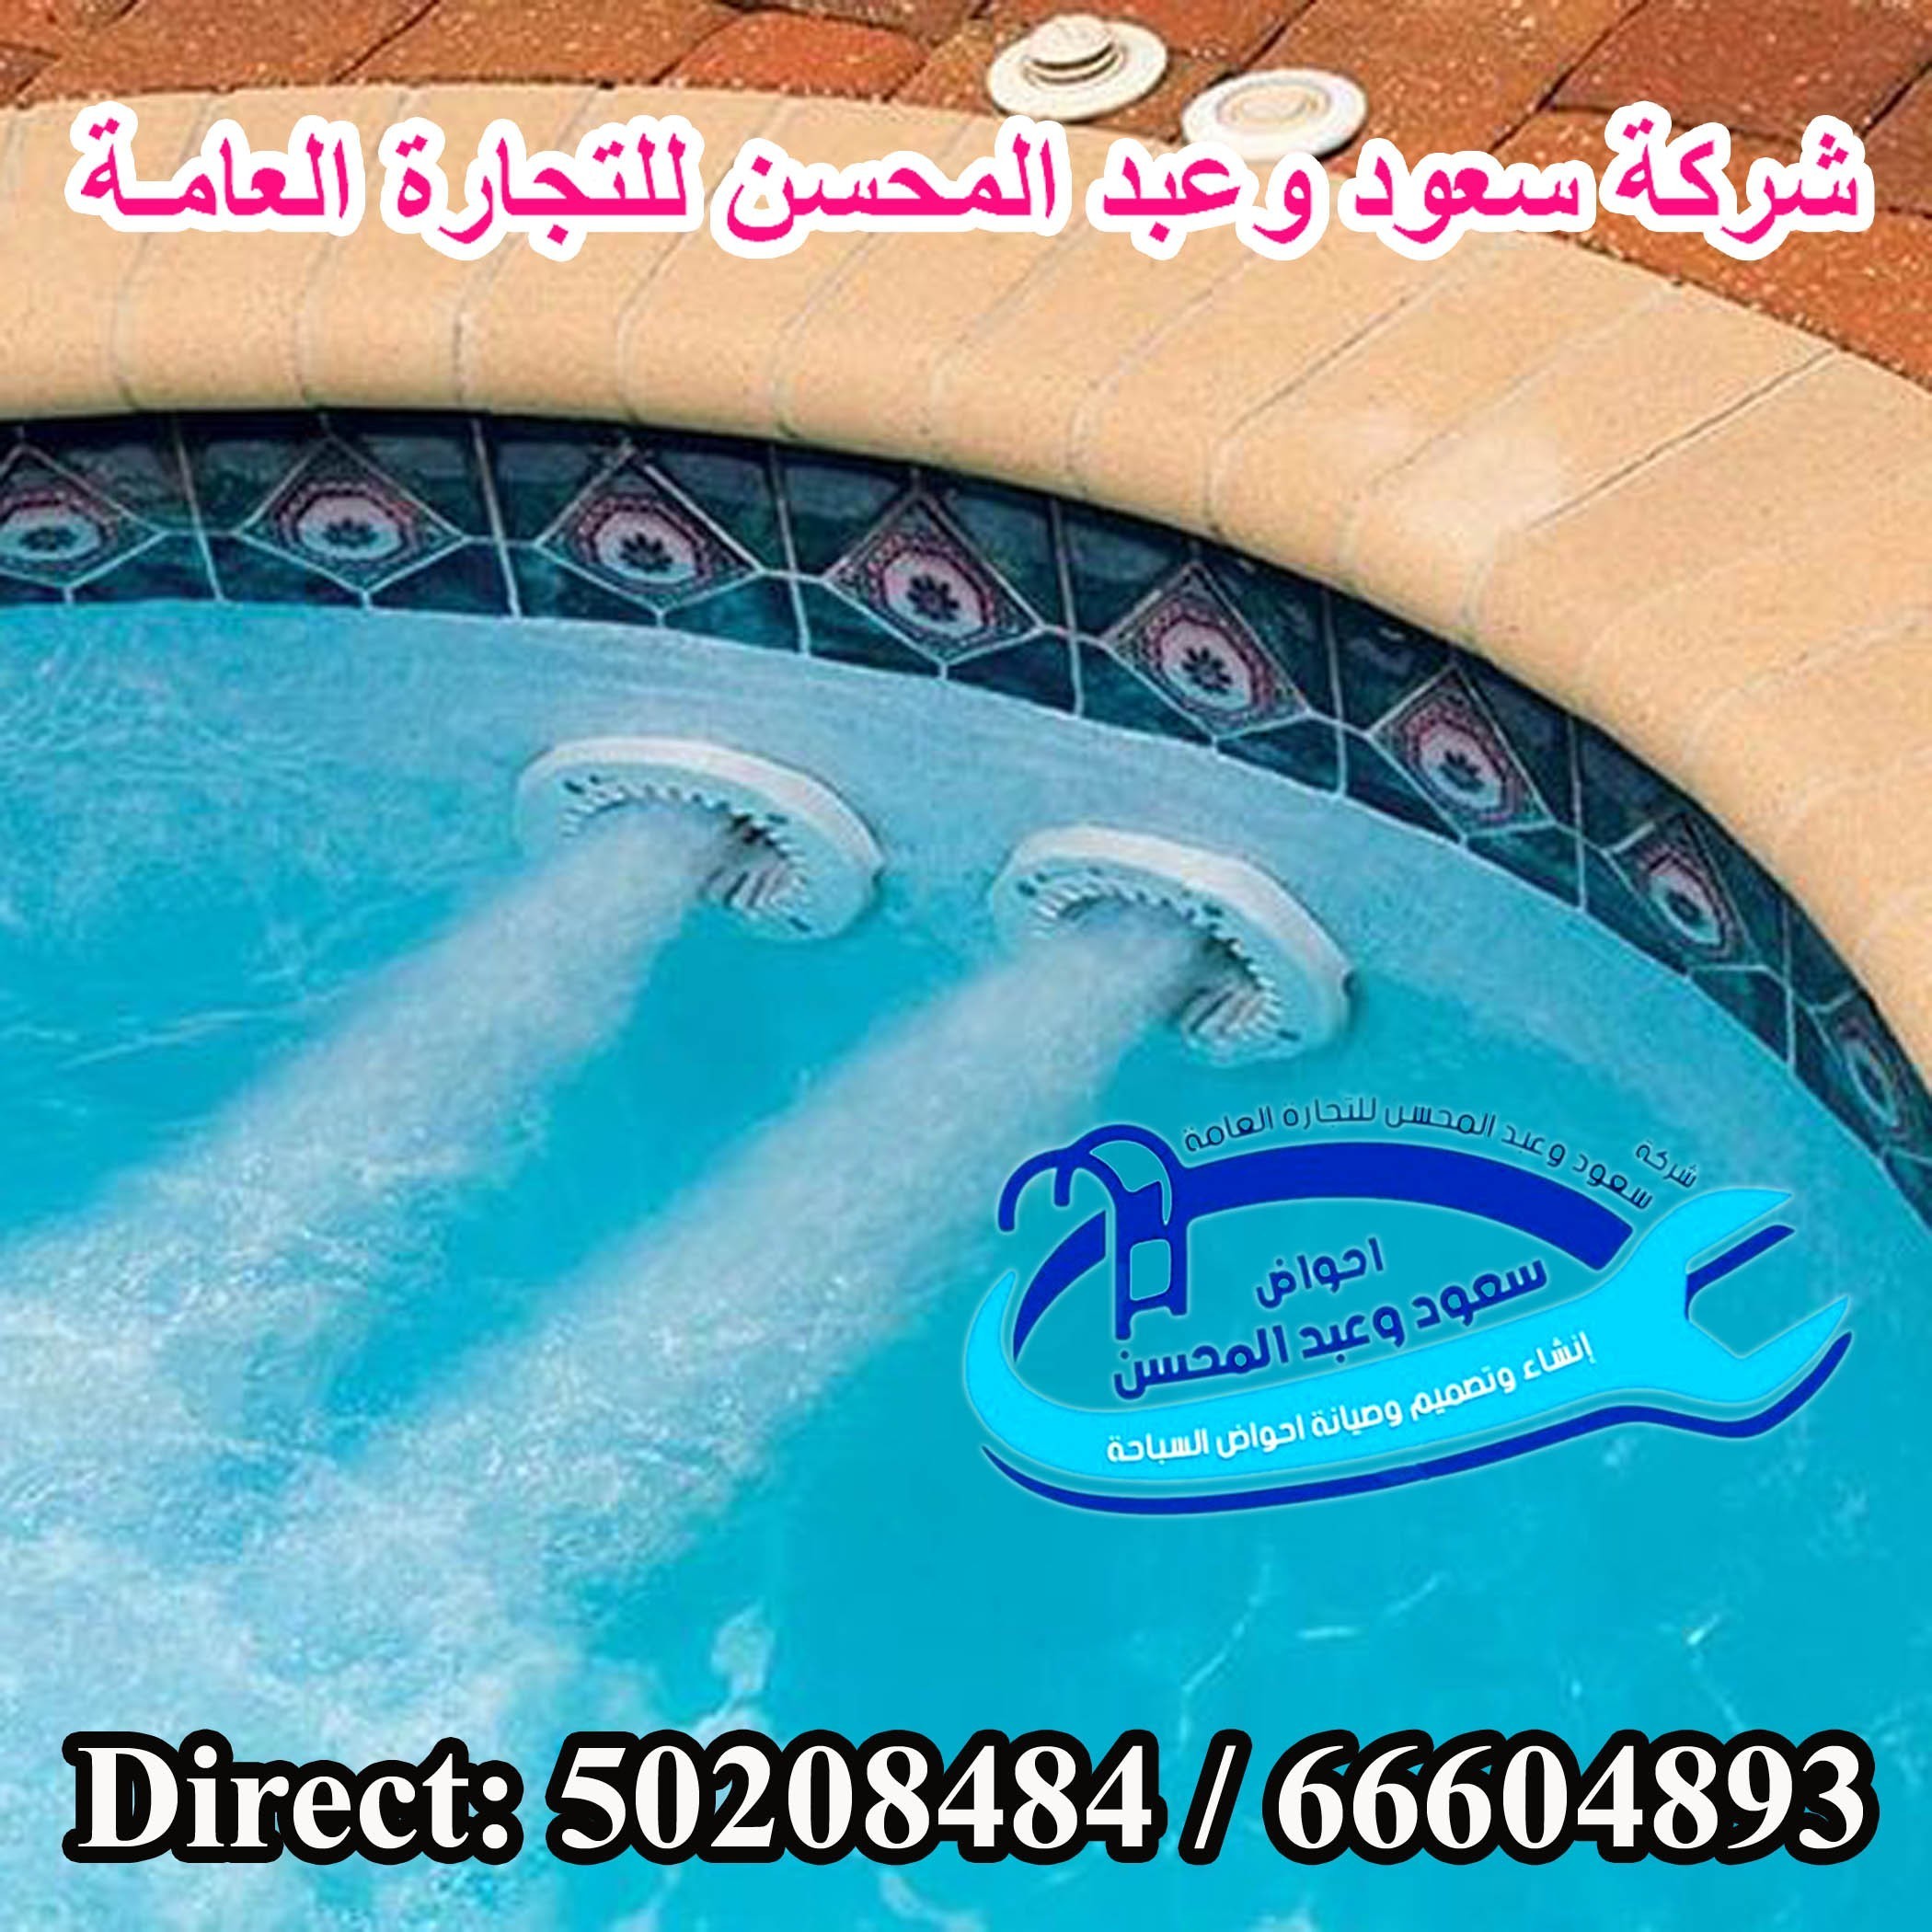 Servicing The Swimming Pools Of Kuwait